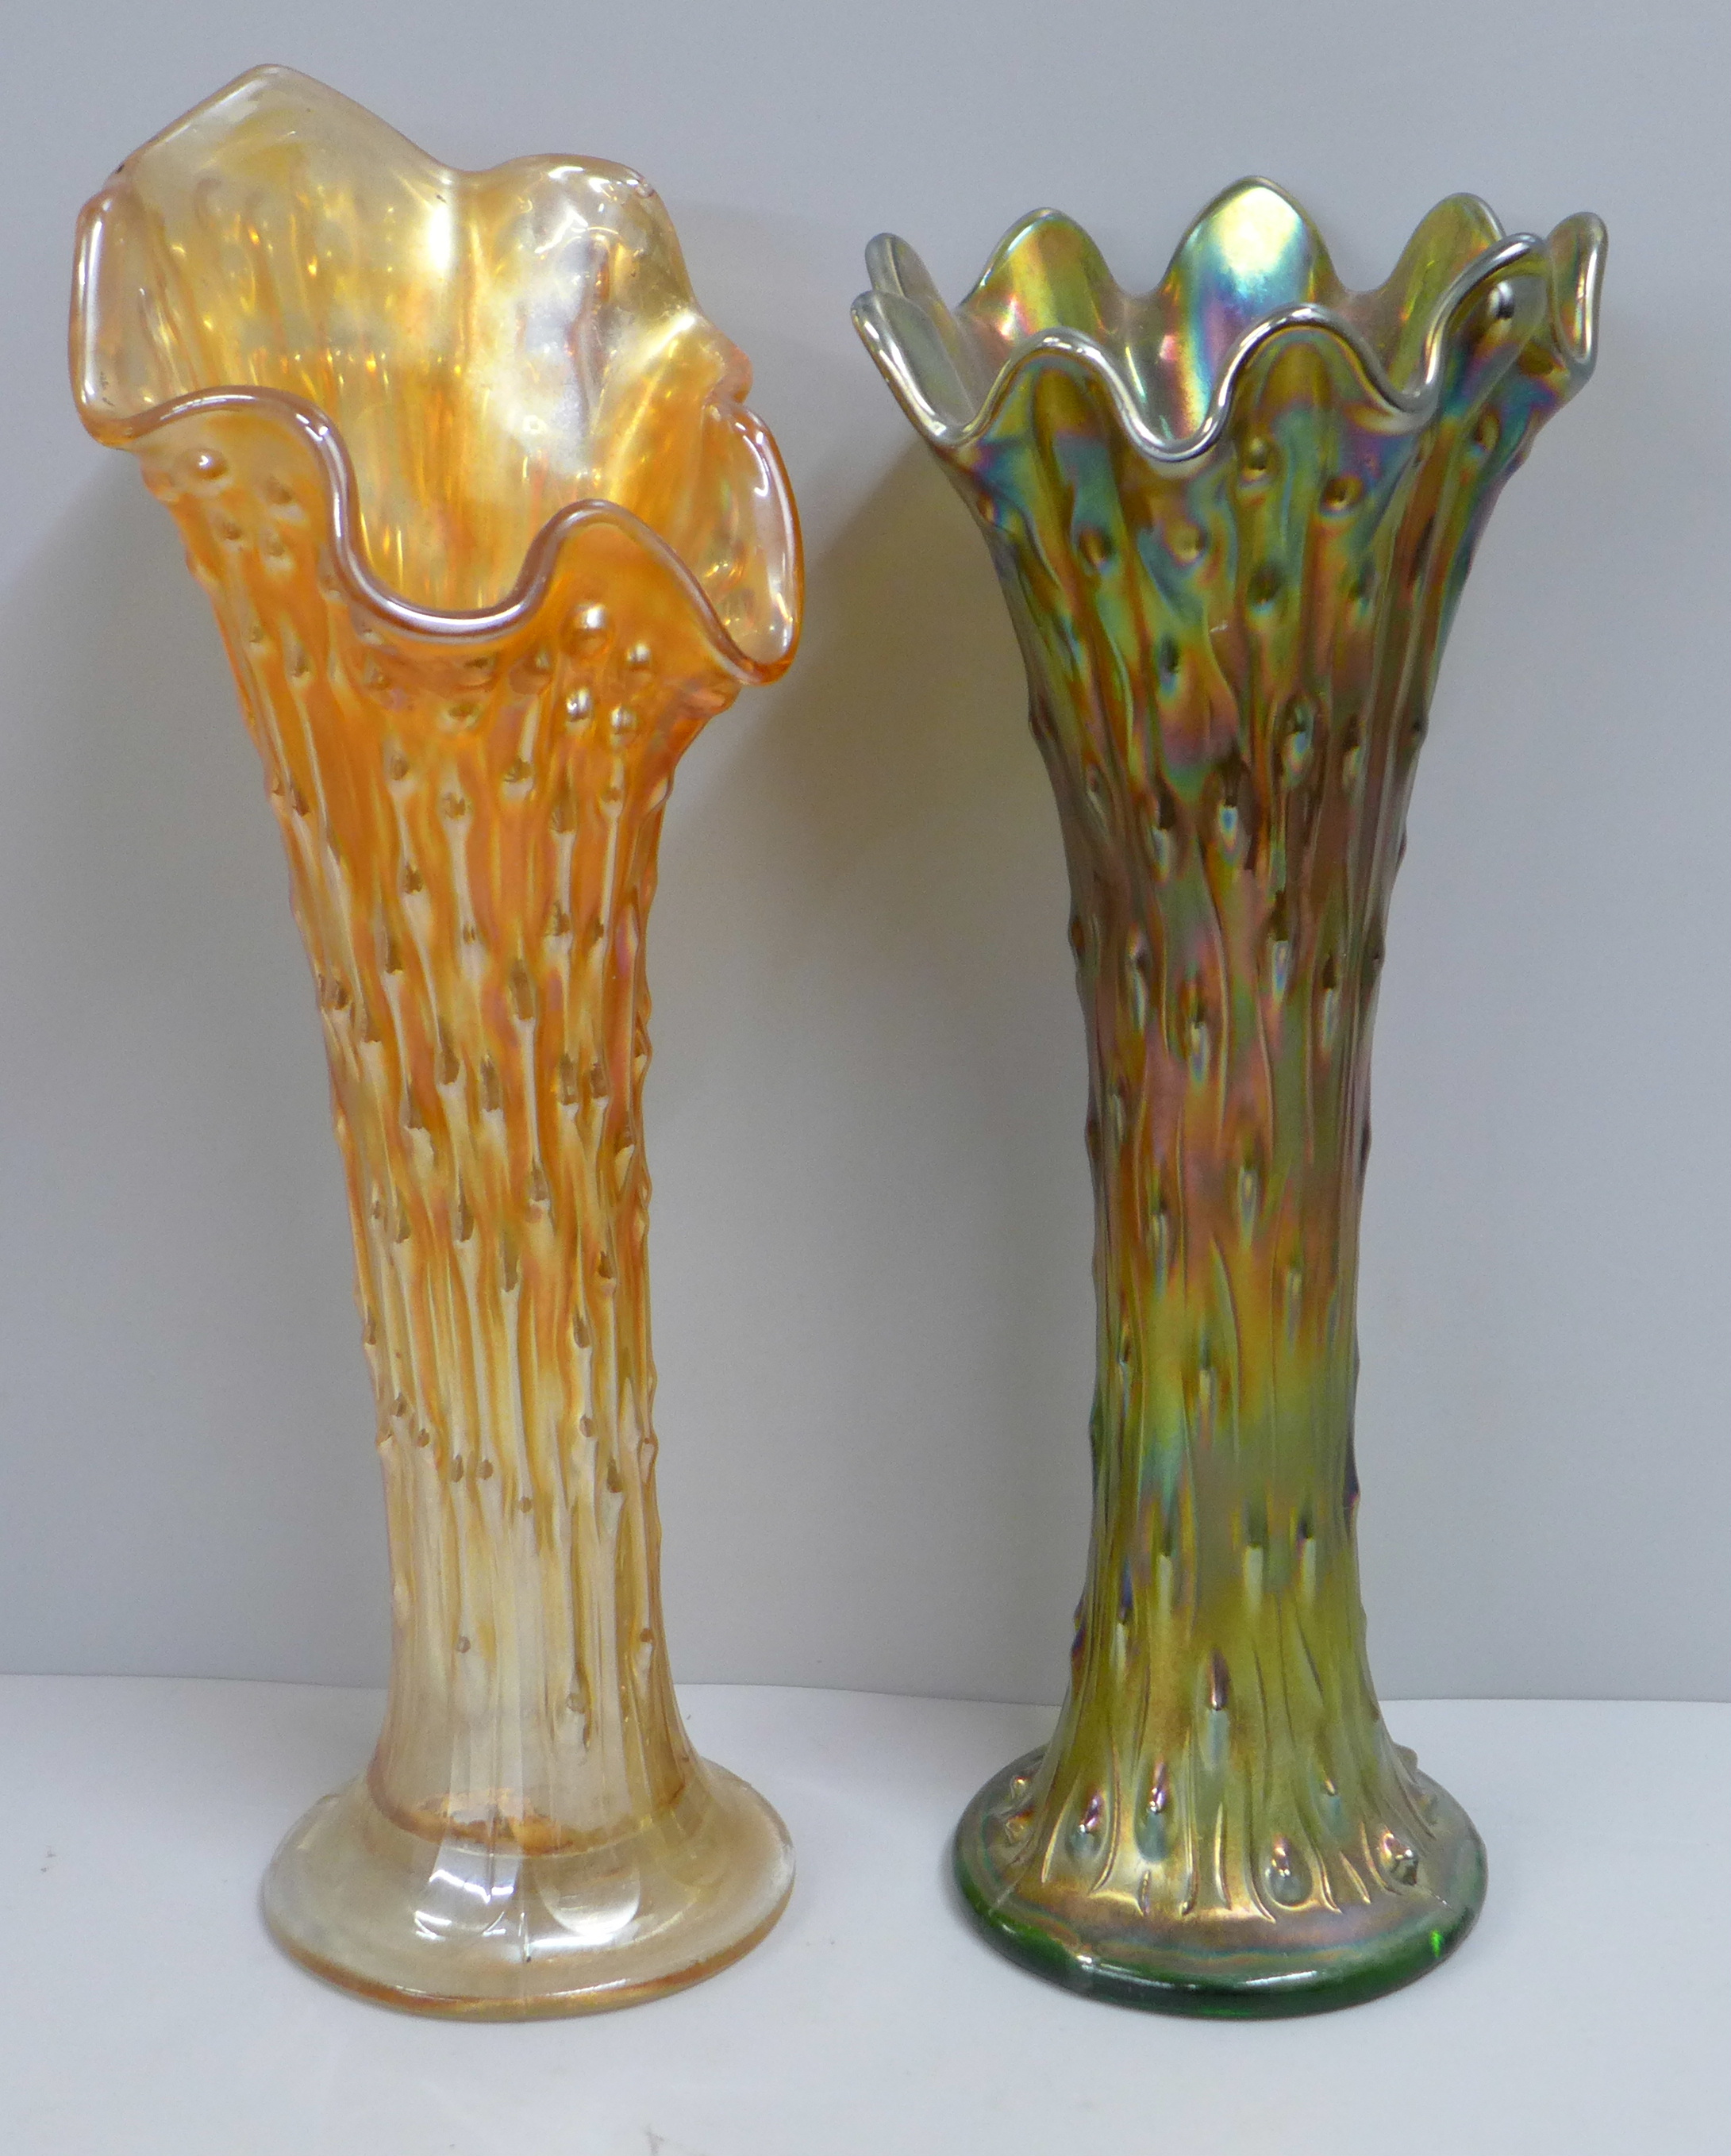 A Northwood iridescent carnival glass tree trunk vase and one other similar in marigold, base